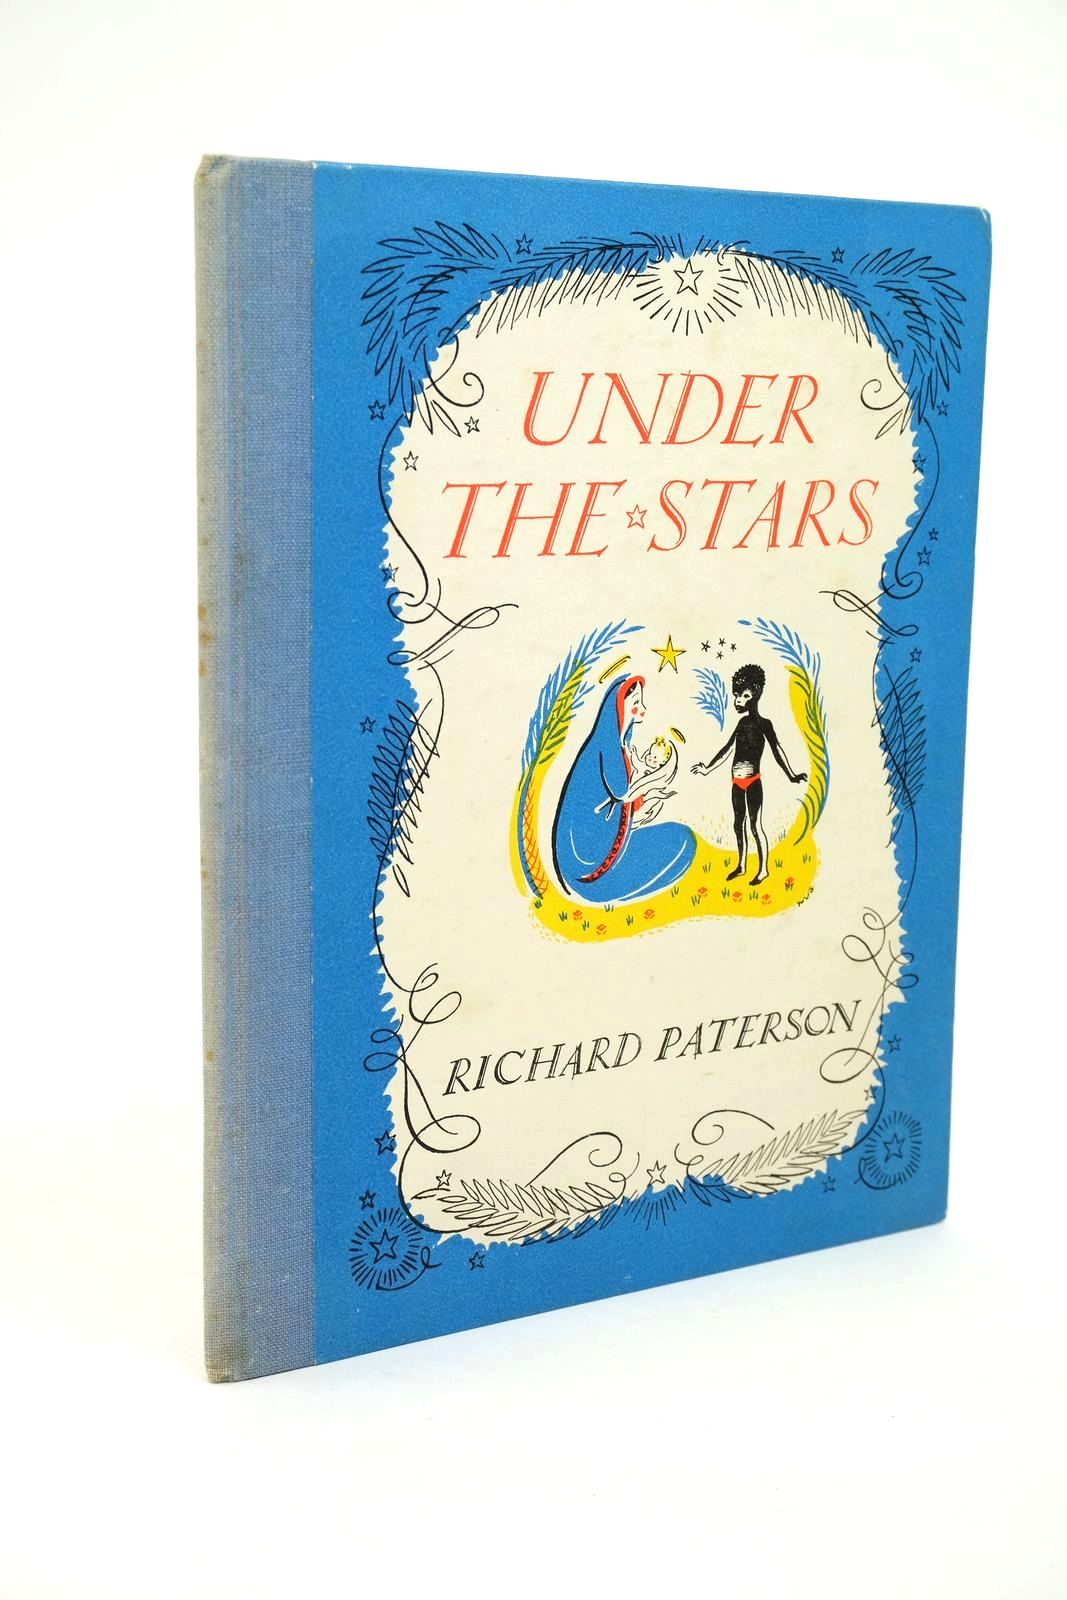 Photo of UNDER THE STARS written by Paterson, Richard illustrated by Green, Sylvia published by A.R. Mowbray & Co. Limited (STOCK CODE: 1322924)  for sale by Stella & Rose's Books